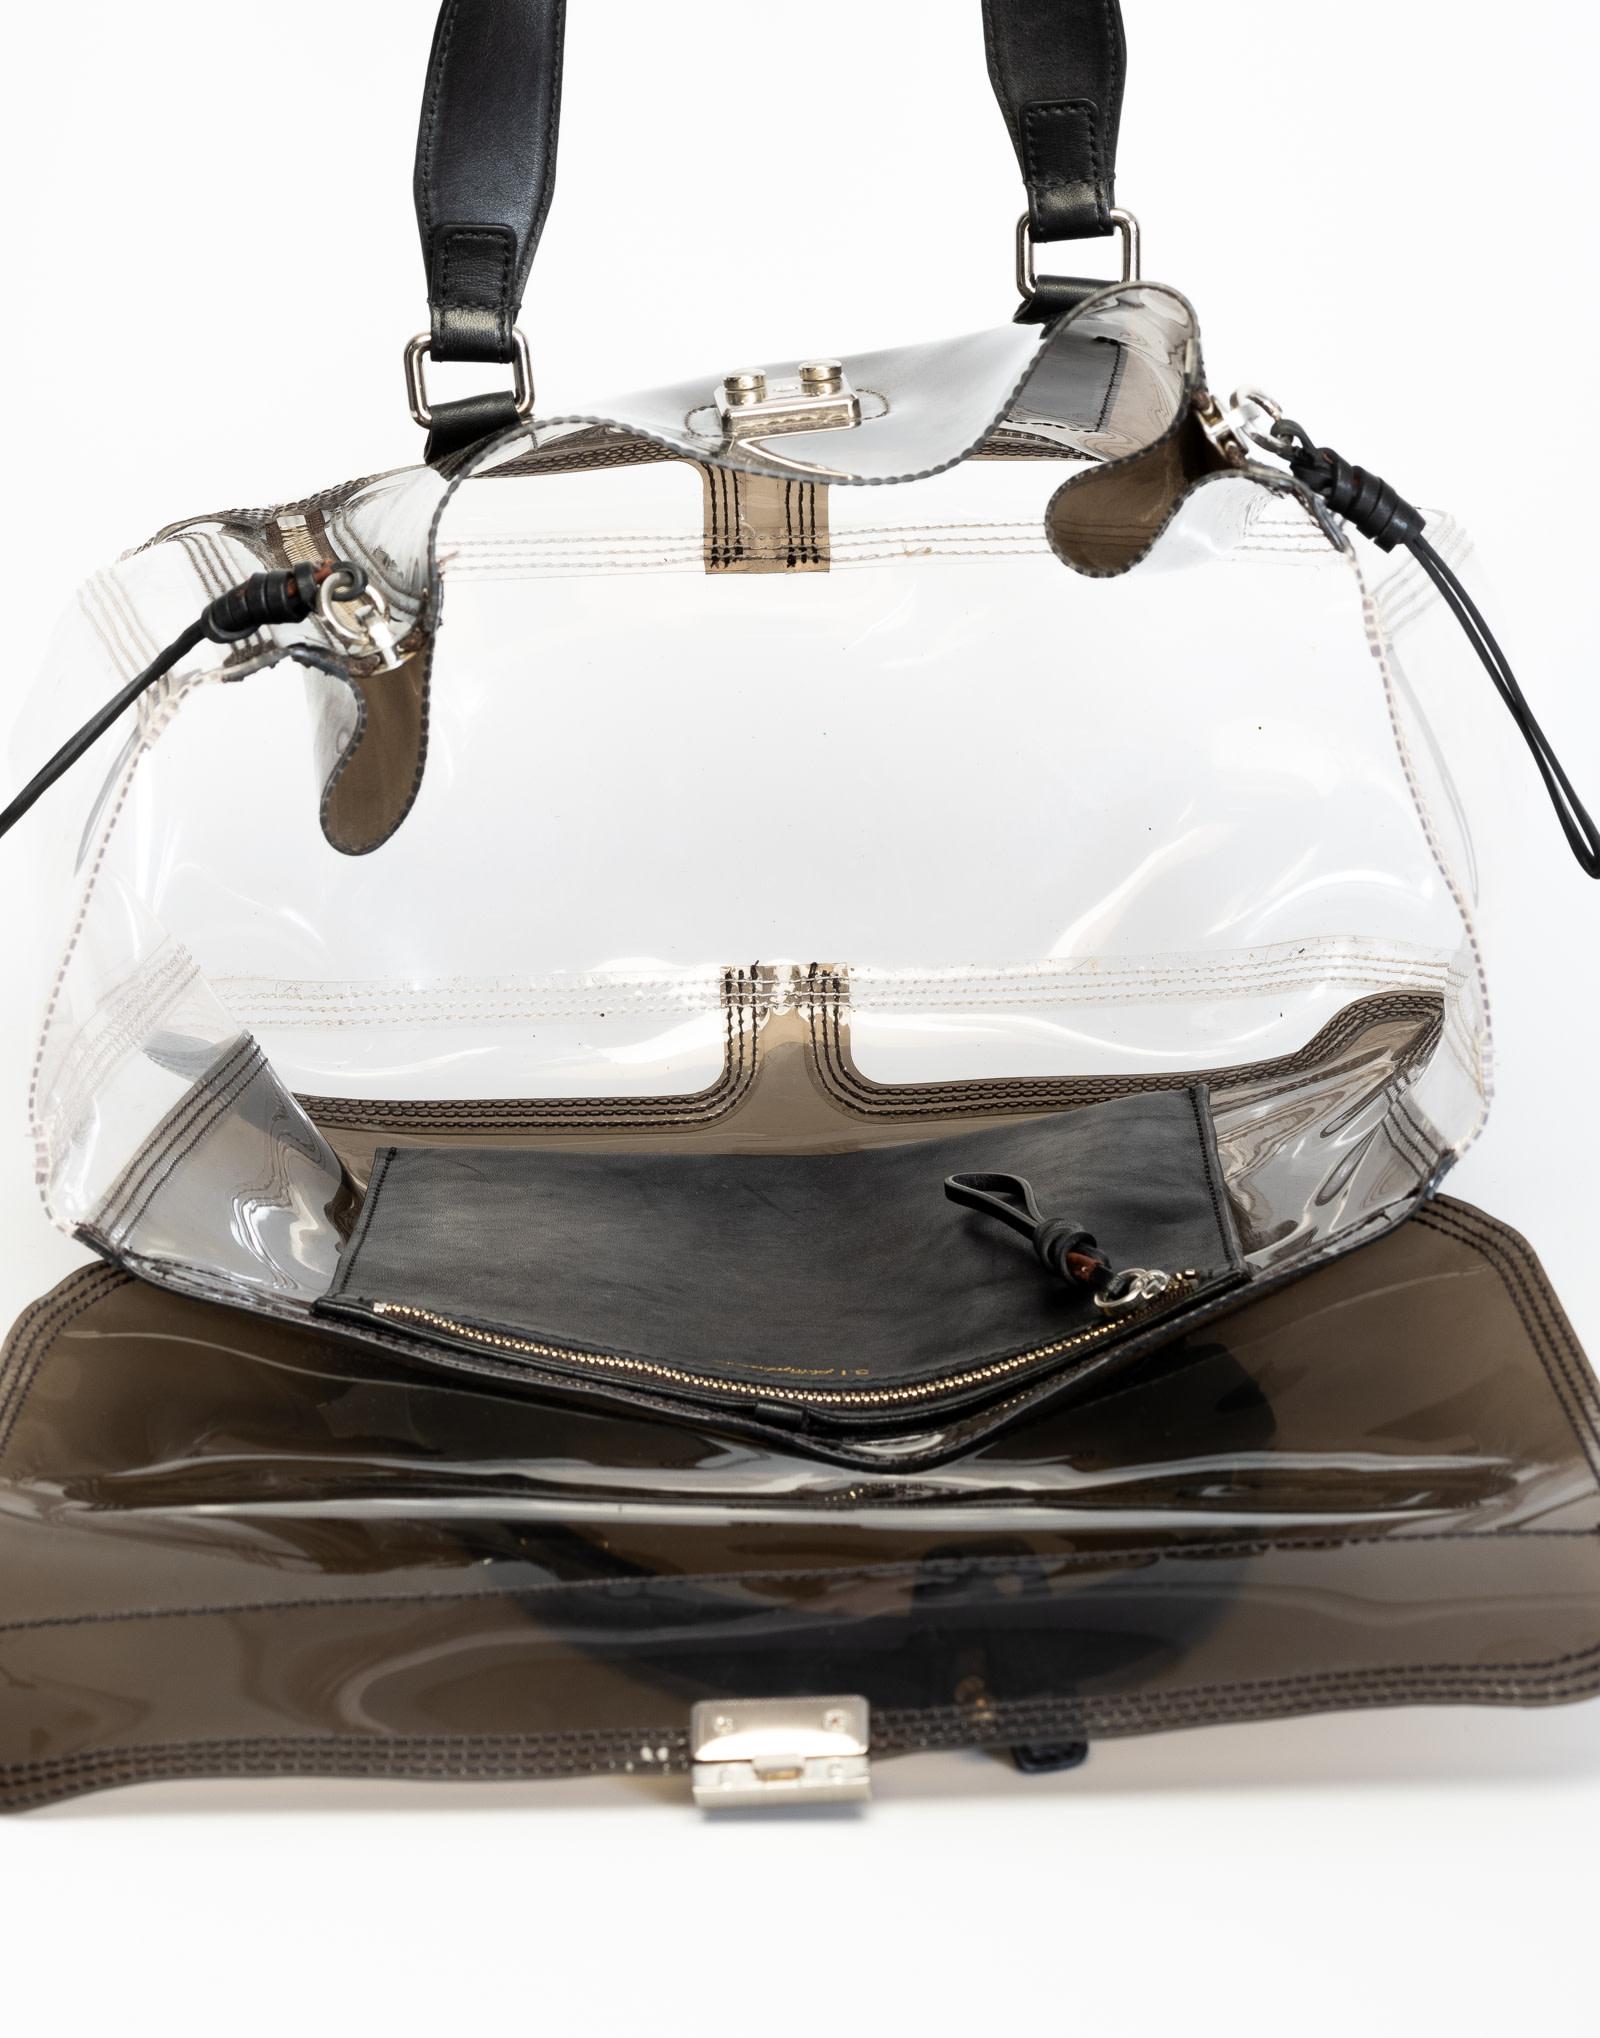 3.1 Phillip Lim Pashli Clear & Black Satchel Bag In Good Condition For Sale In Montreal, Quebec